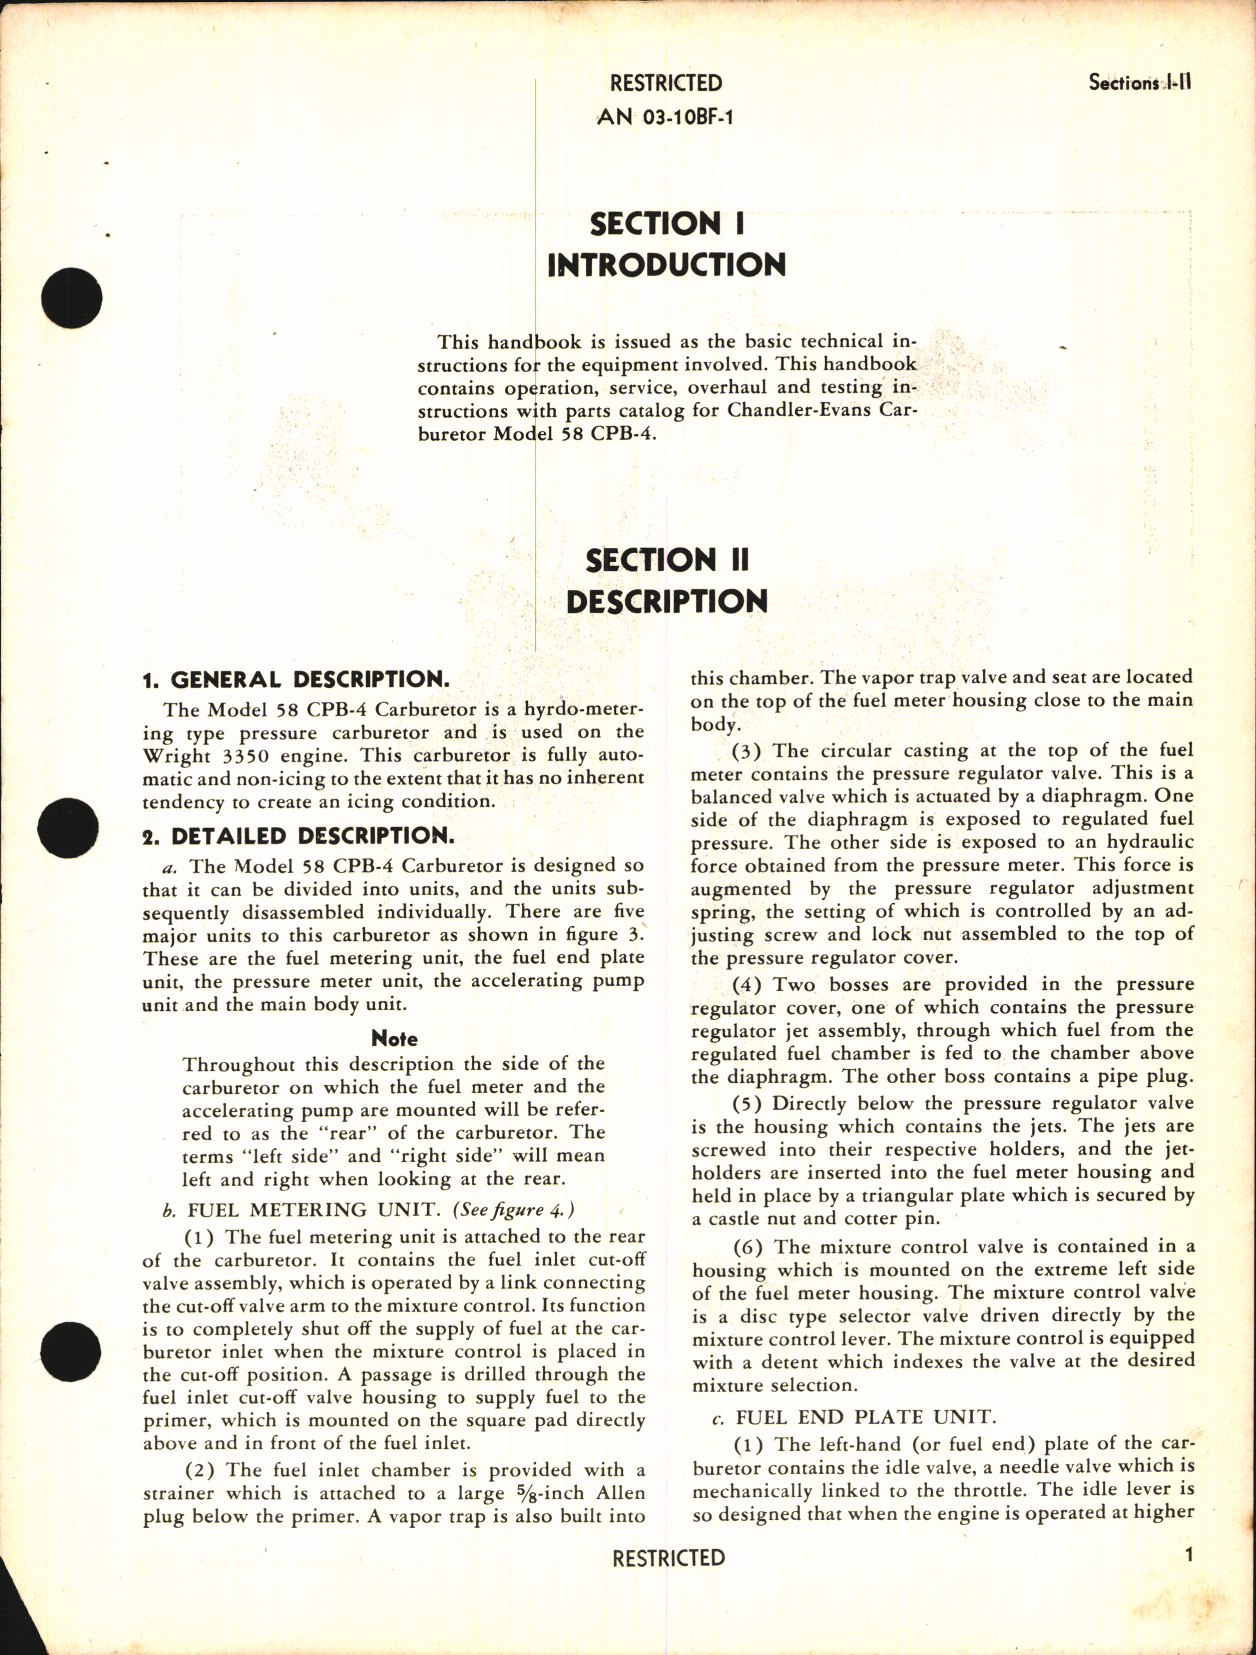 Sample page 5 from AirCorps Library document: Handbook of Instructions with Parts Catalog for Hydro-Metering Carburetor Model 58CPB-4